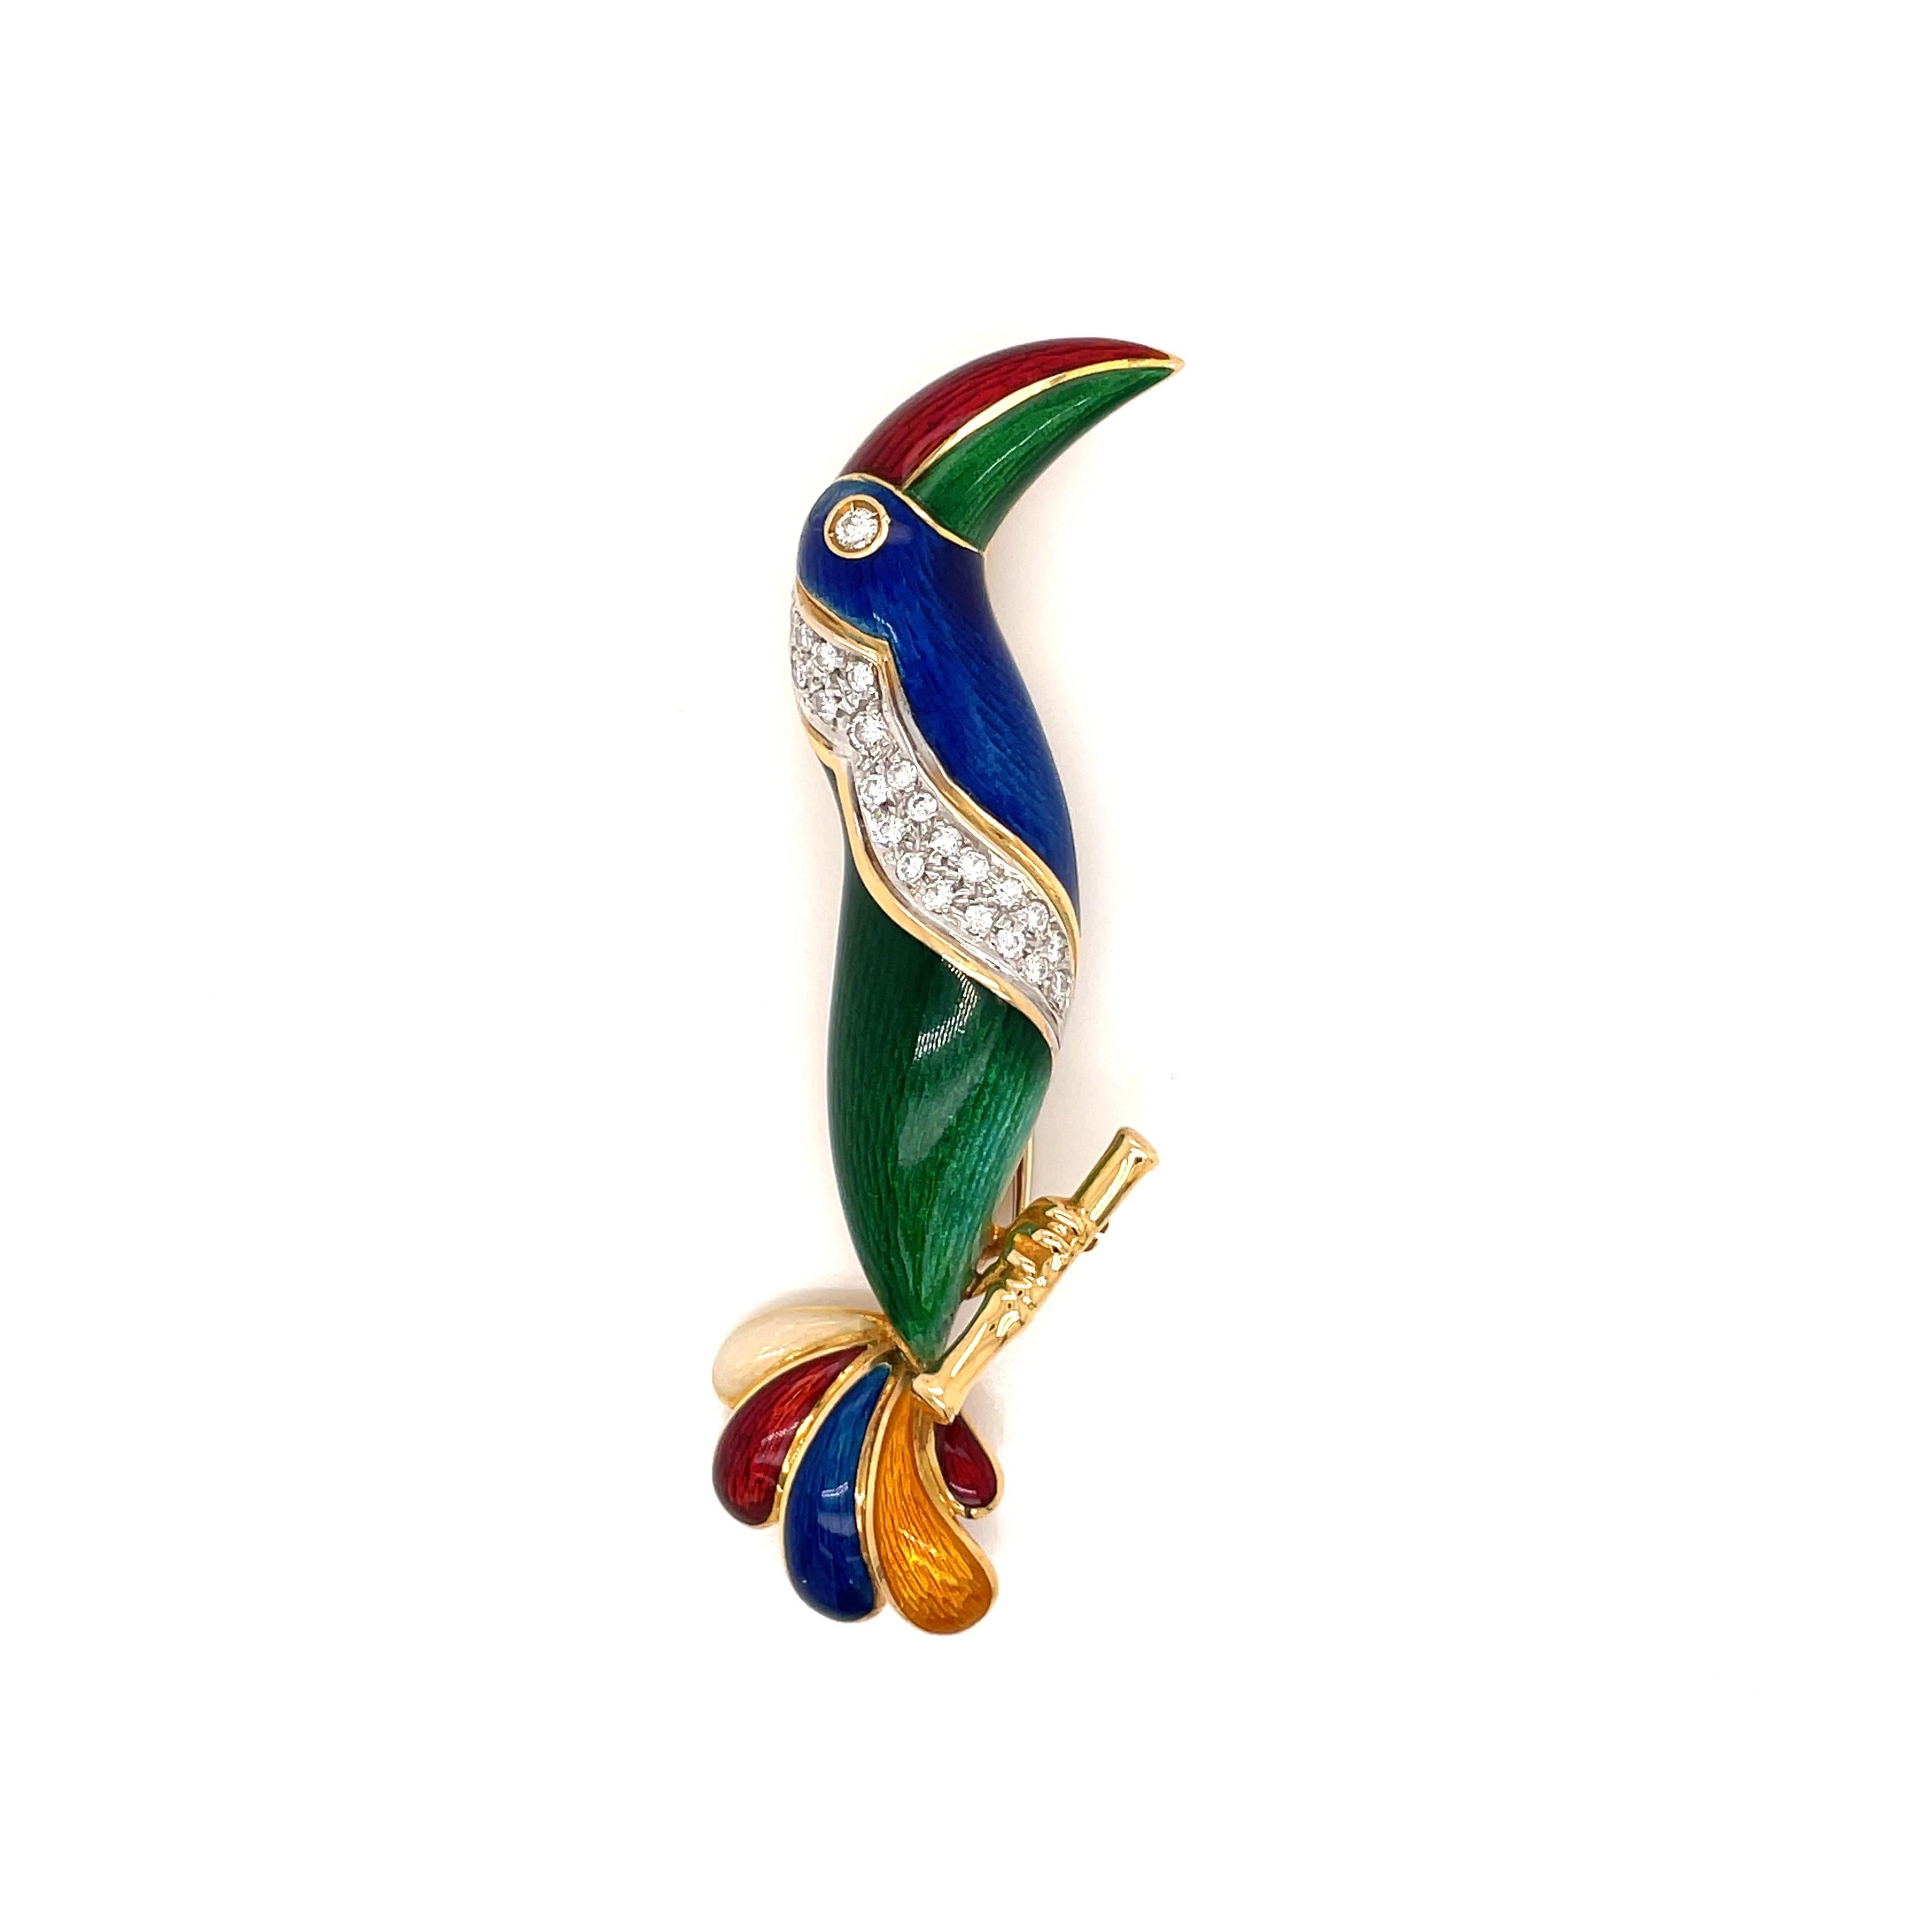 An Illario Diamond Enameled Gold Parrot Brooch. Made in Italy, circa 1970

Designed and made in Italy in solid 18k yellow and white gold by Illario in the 70's, featuring colorless round brilliant cut diamonds and fine enamels, really an excellent